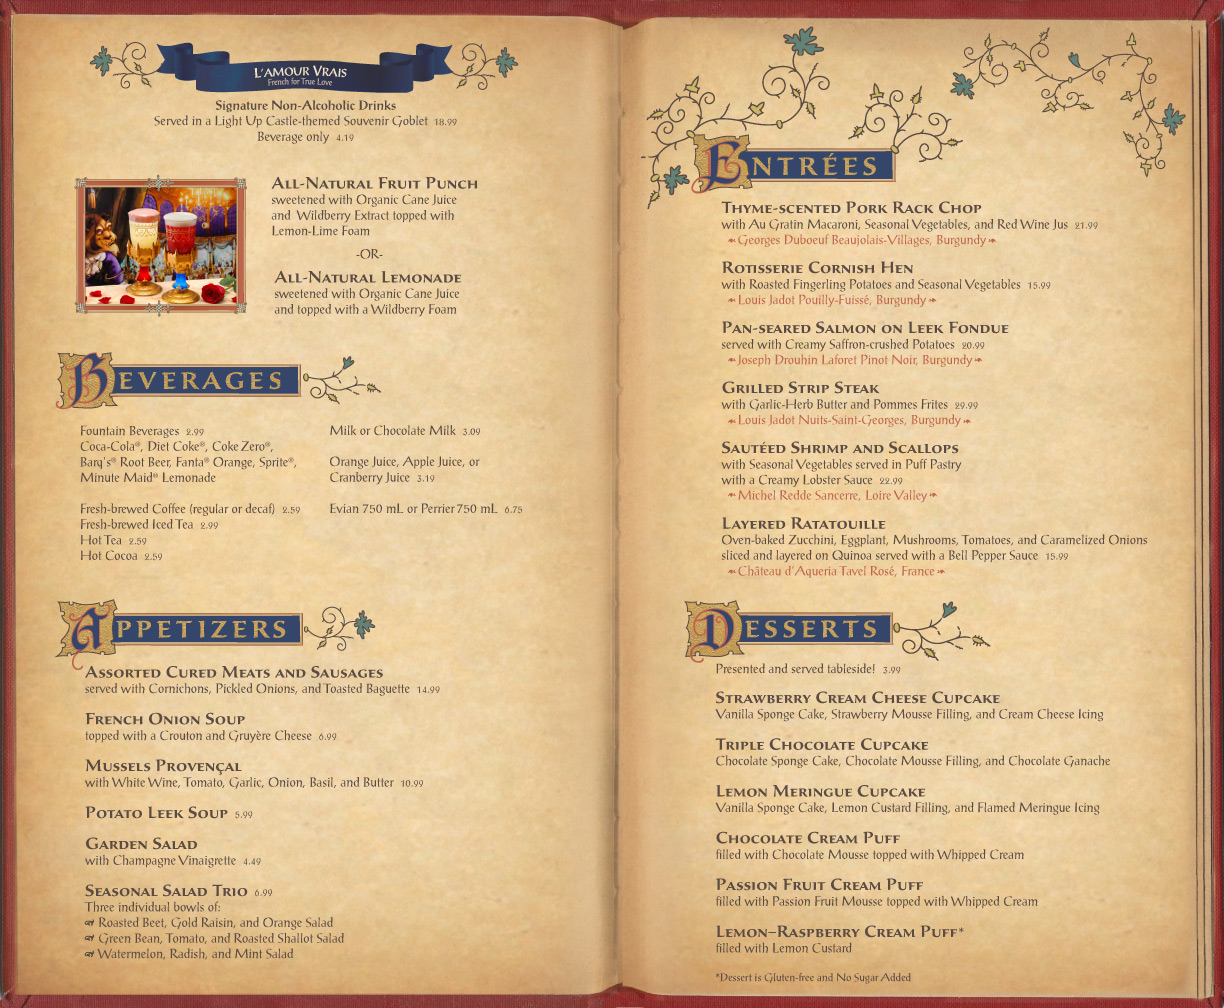 Be Our Guest Restaurant Menu Art Photo 2 Of 3